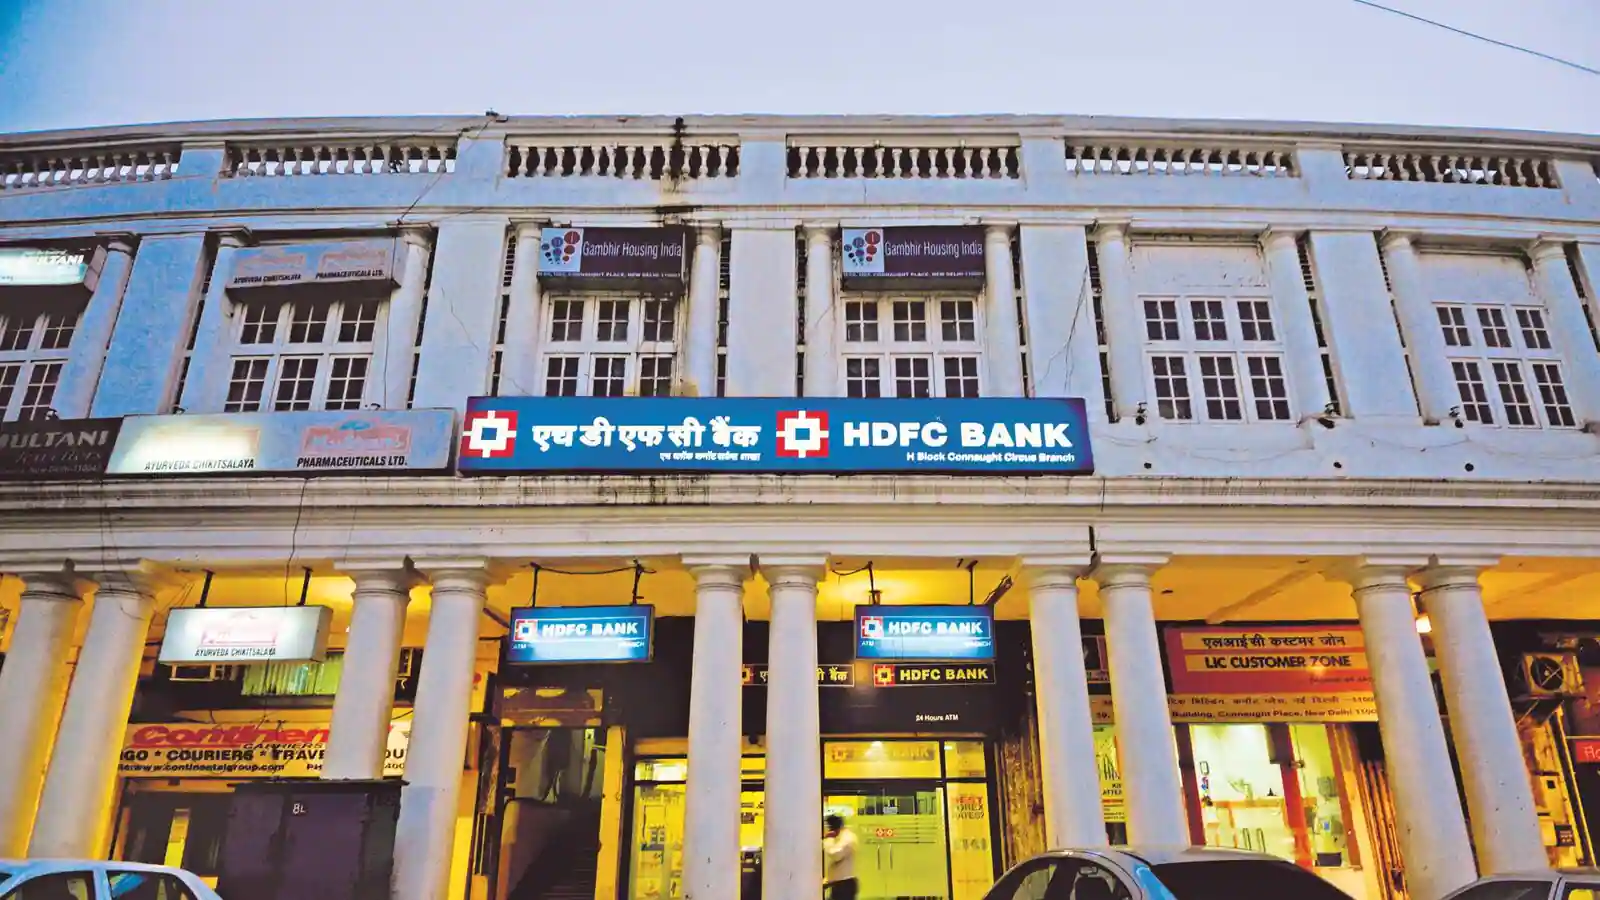 HDFC Bank Products and Services